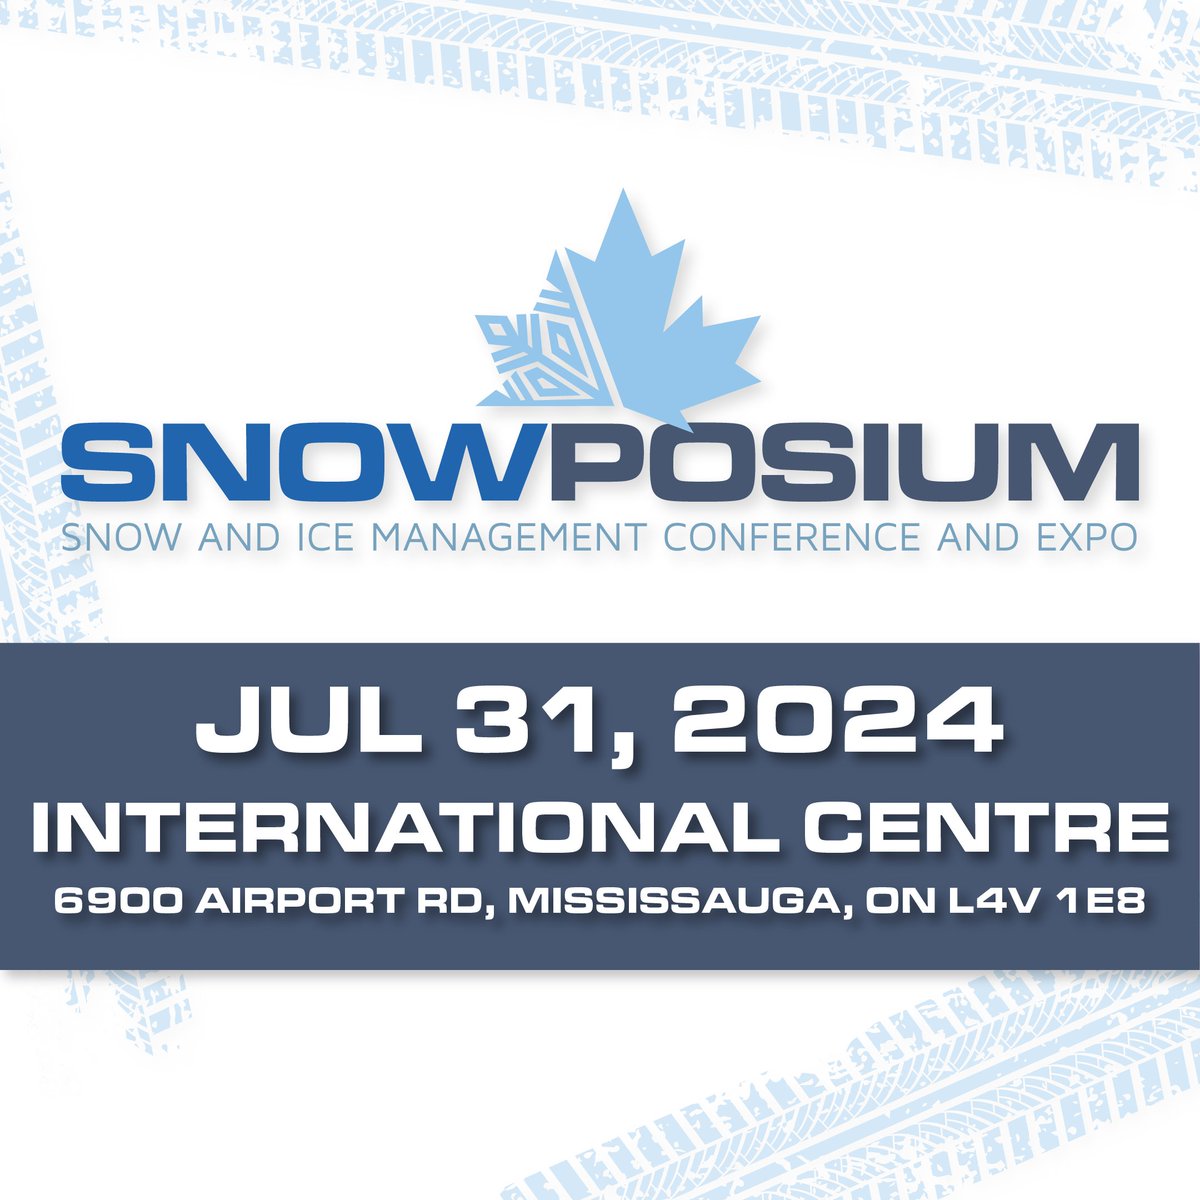 SNOWPOSIUM IS BACK ❄️ The annual gathering of Snow and Ice professionals is back in 2024 with TWO MAJOR CHANGES❗ - Join us at the International Centre in Mississauga - On July 31, 2024 👉 Learn more and register: snowposium.ca #LandscapeOntario #Snowposium2024